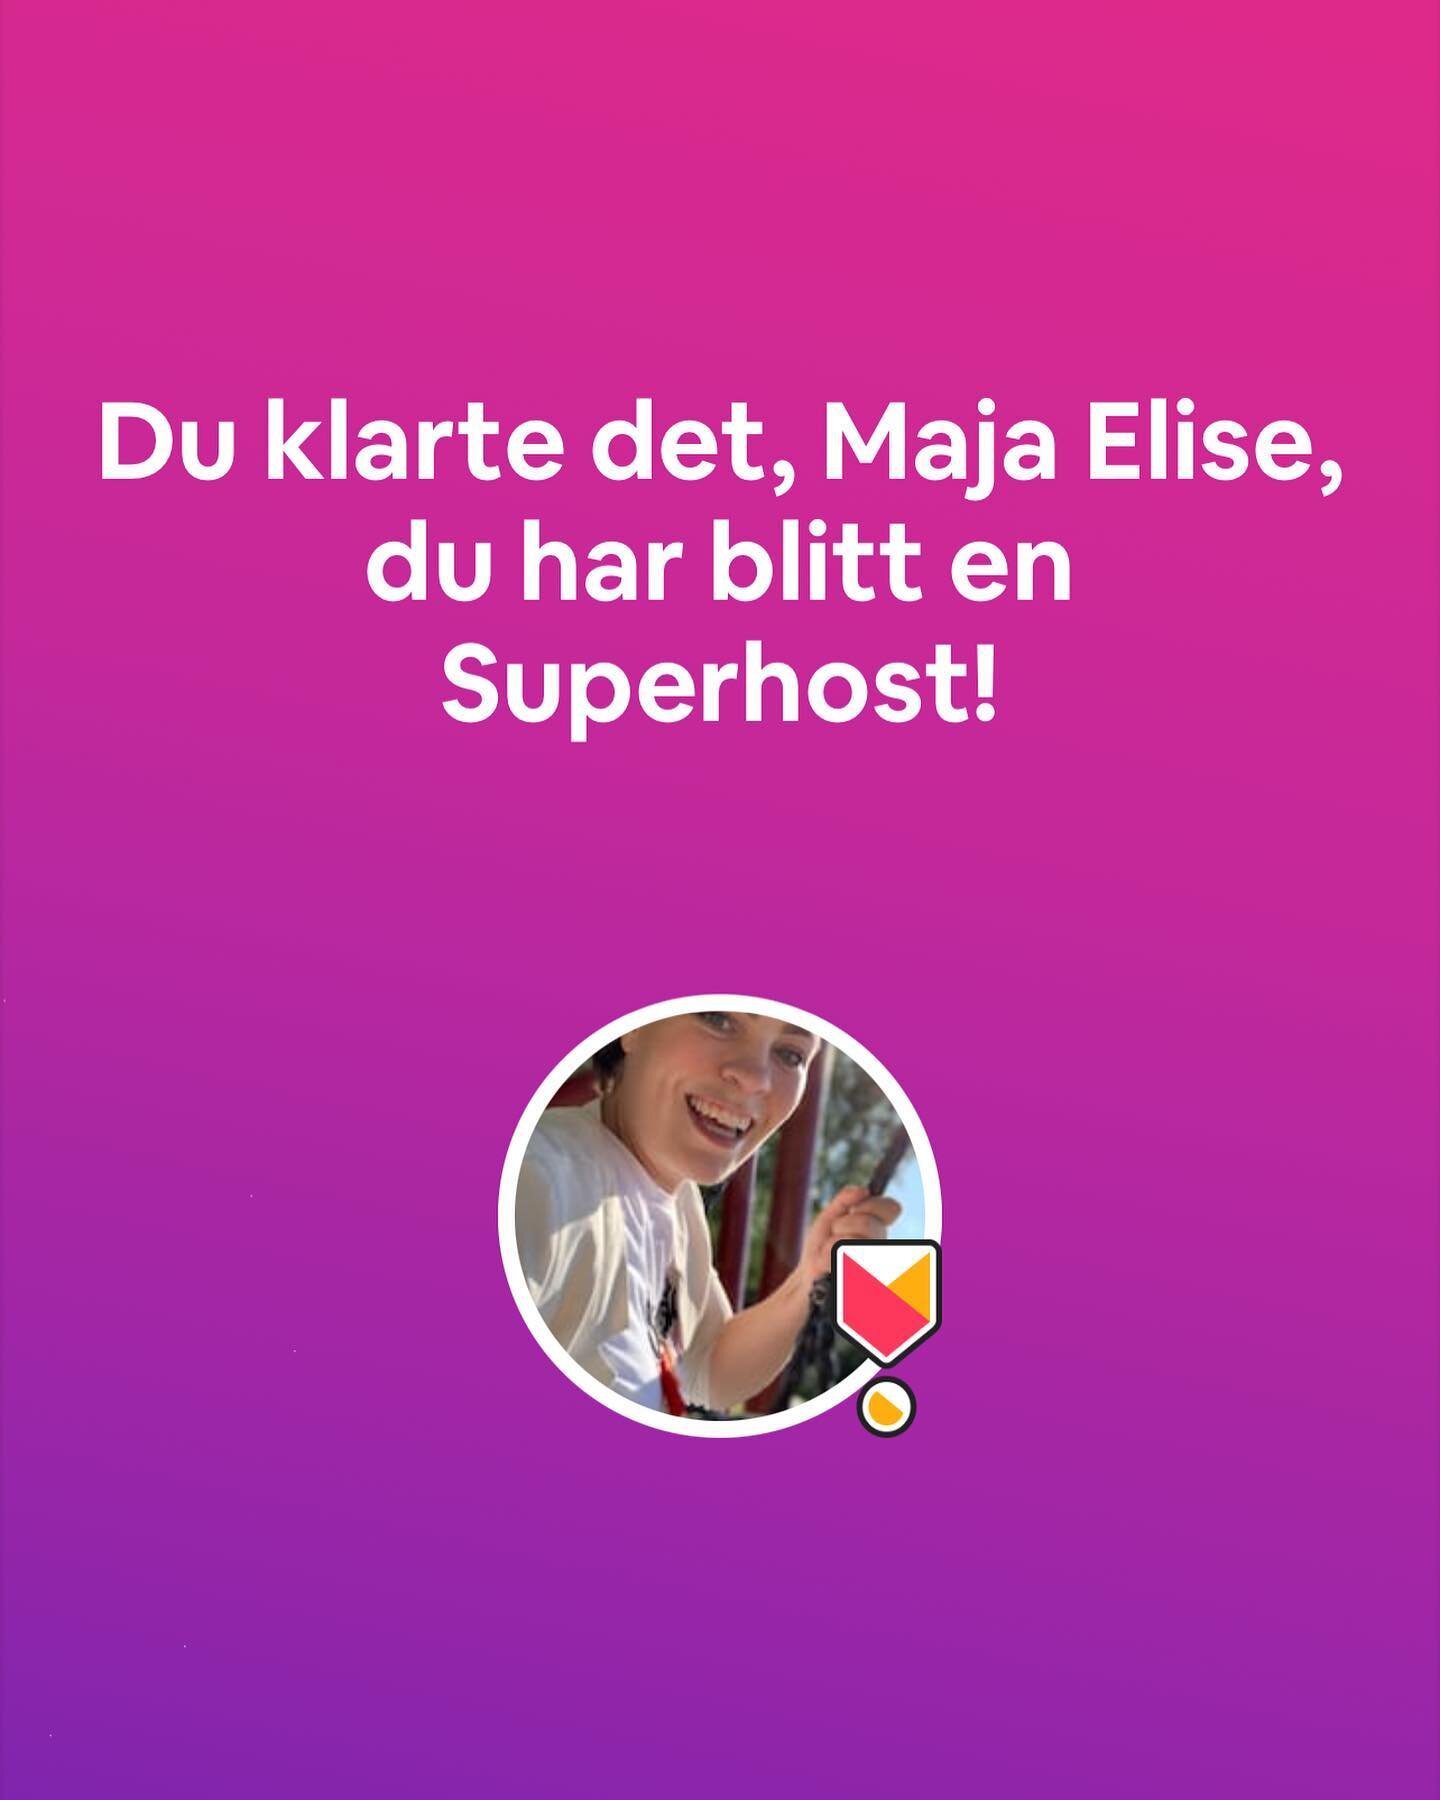 October 1., we recieved AirBnbs &laquo;Superhost&raquo; title. That means our guests rates us at a minimum of 4.8 out of 5 stars, on everything from communication to cleaning. This title is a guarantee for you as a guest, that the rental and host hol